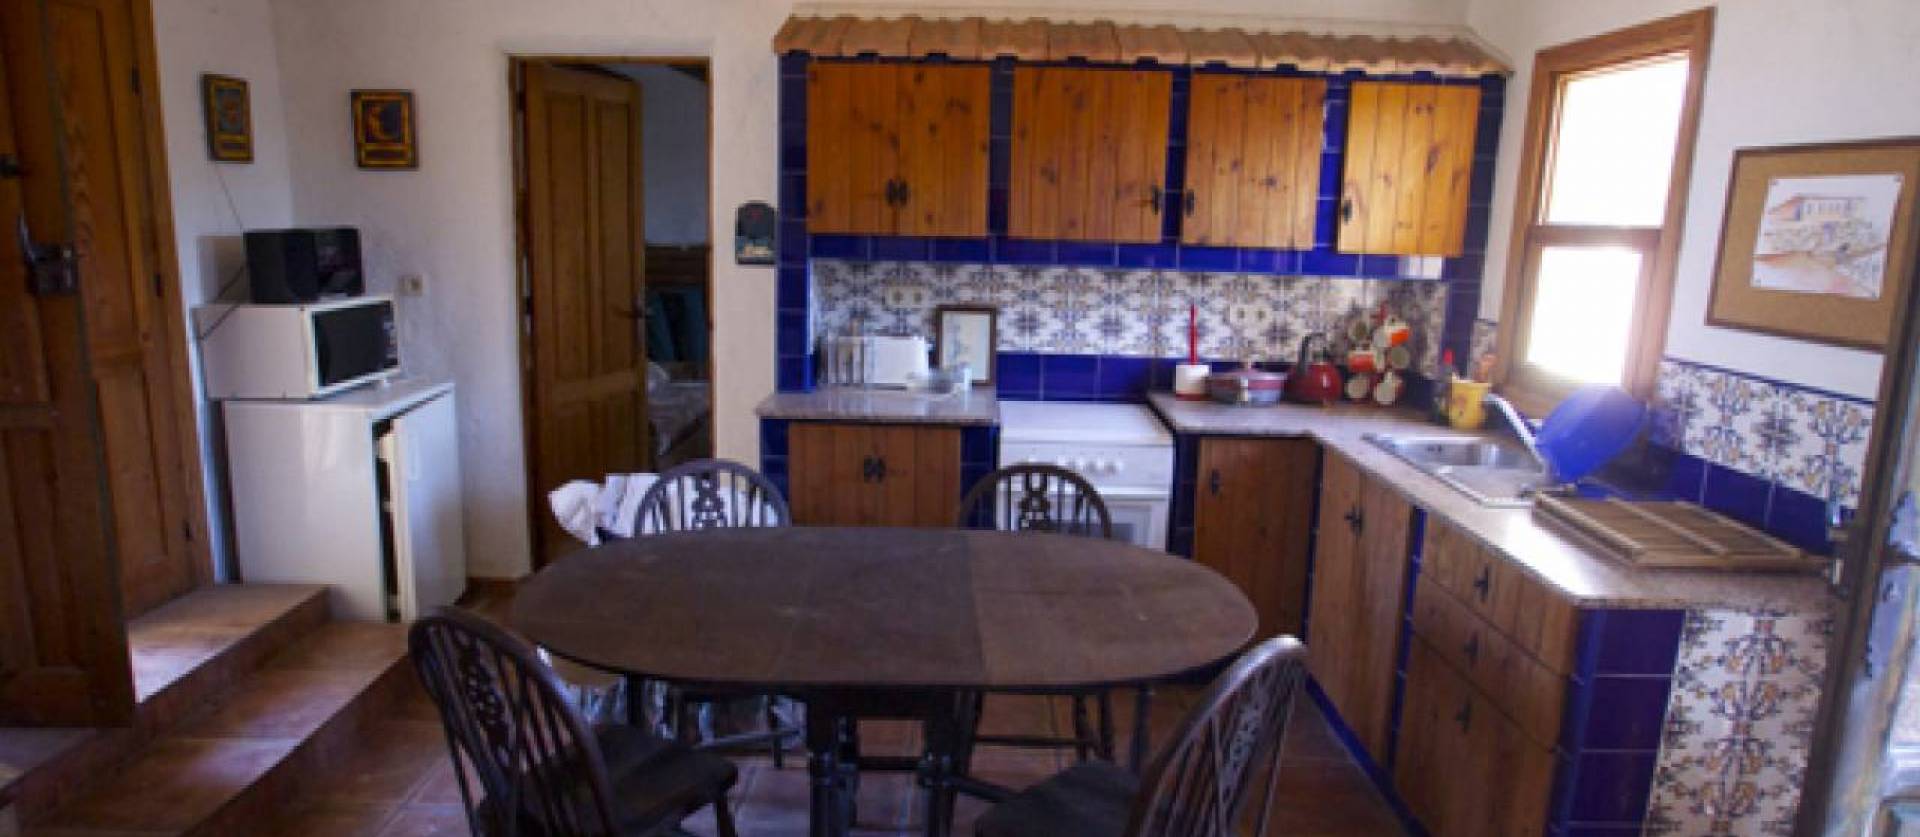 Sale - Finca / Country Property - Rojales